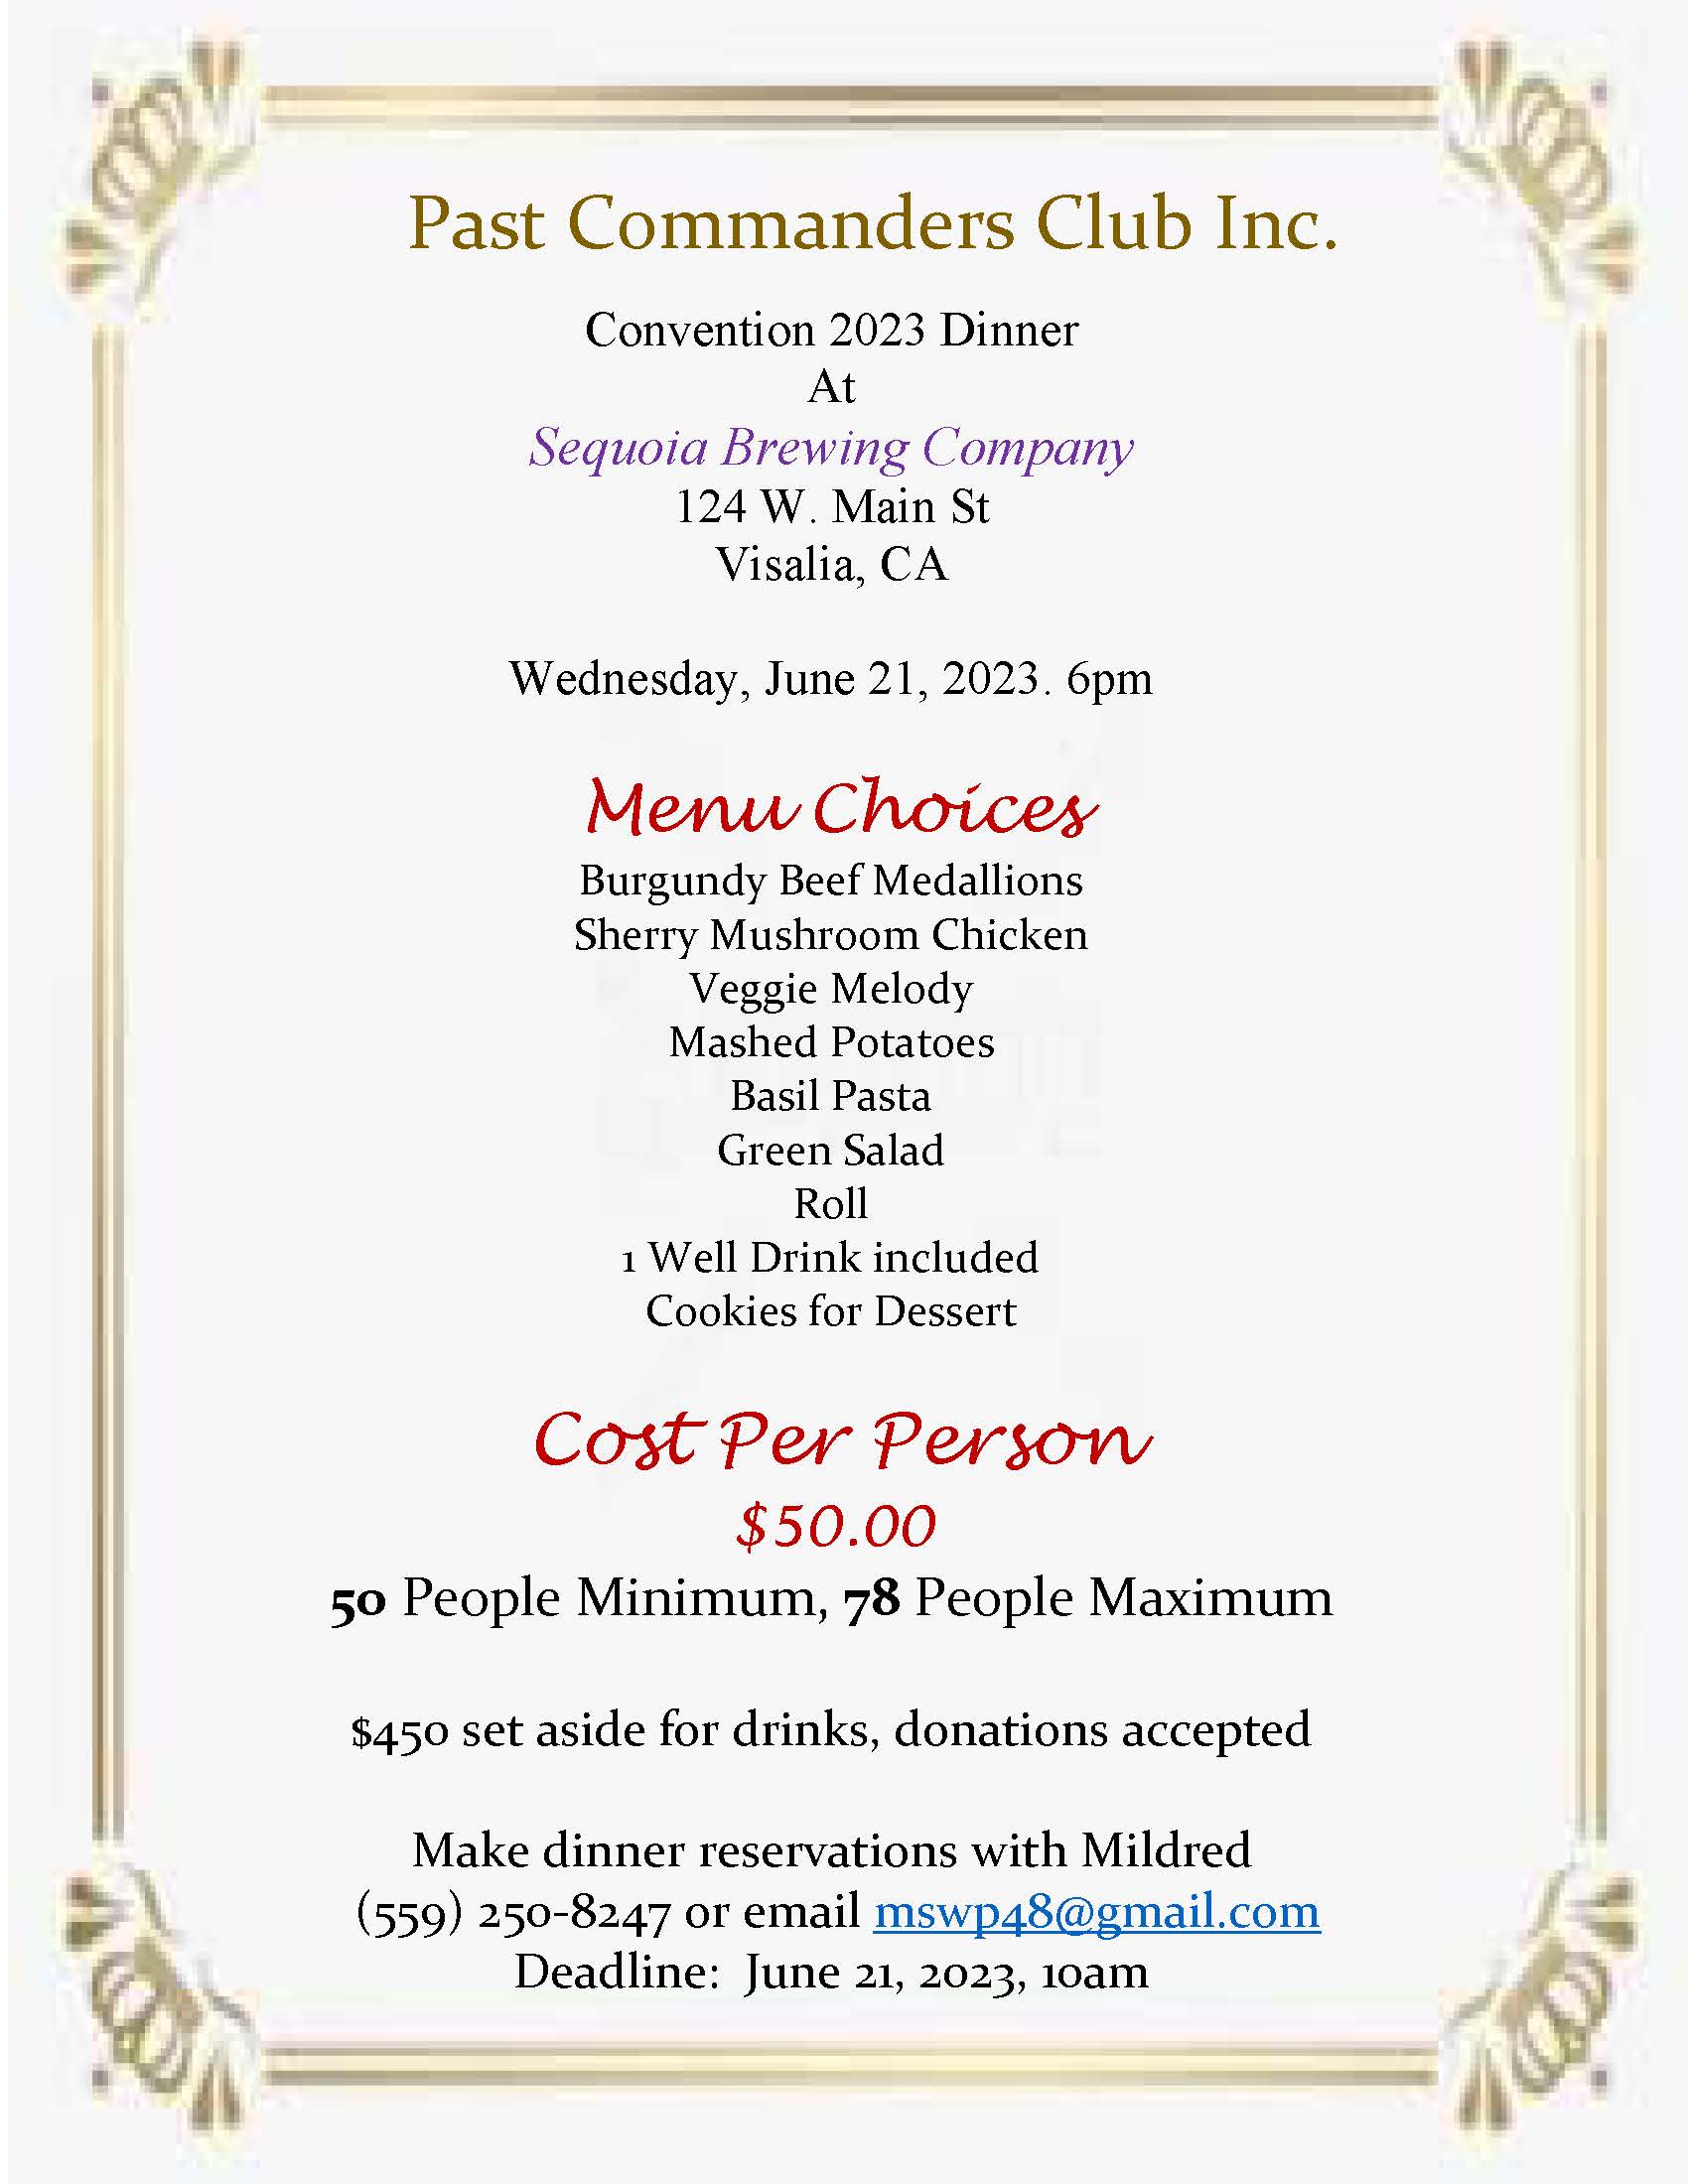 Past Commanders Club Convention 2023 Dinner flyer